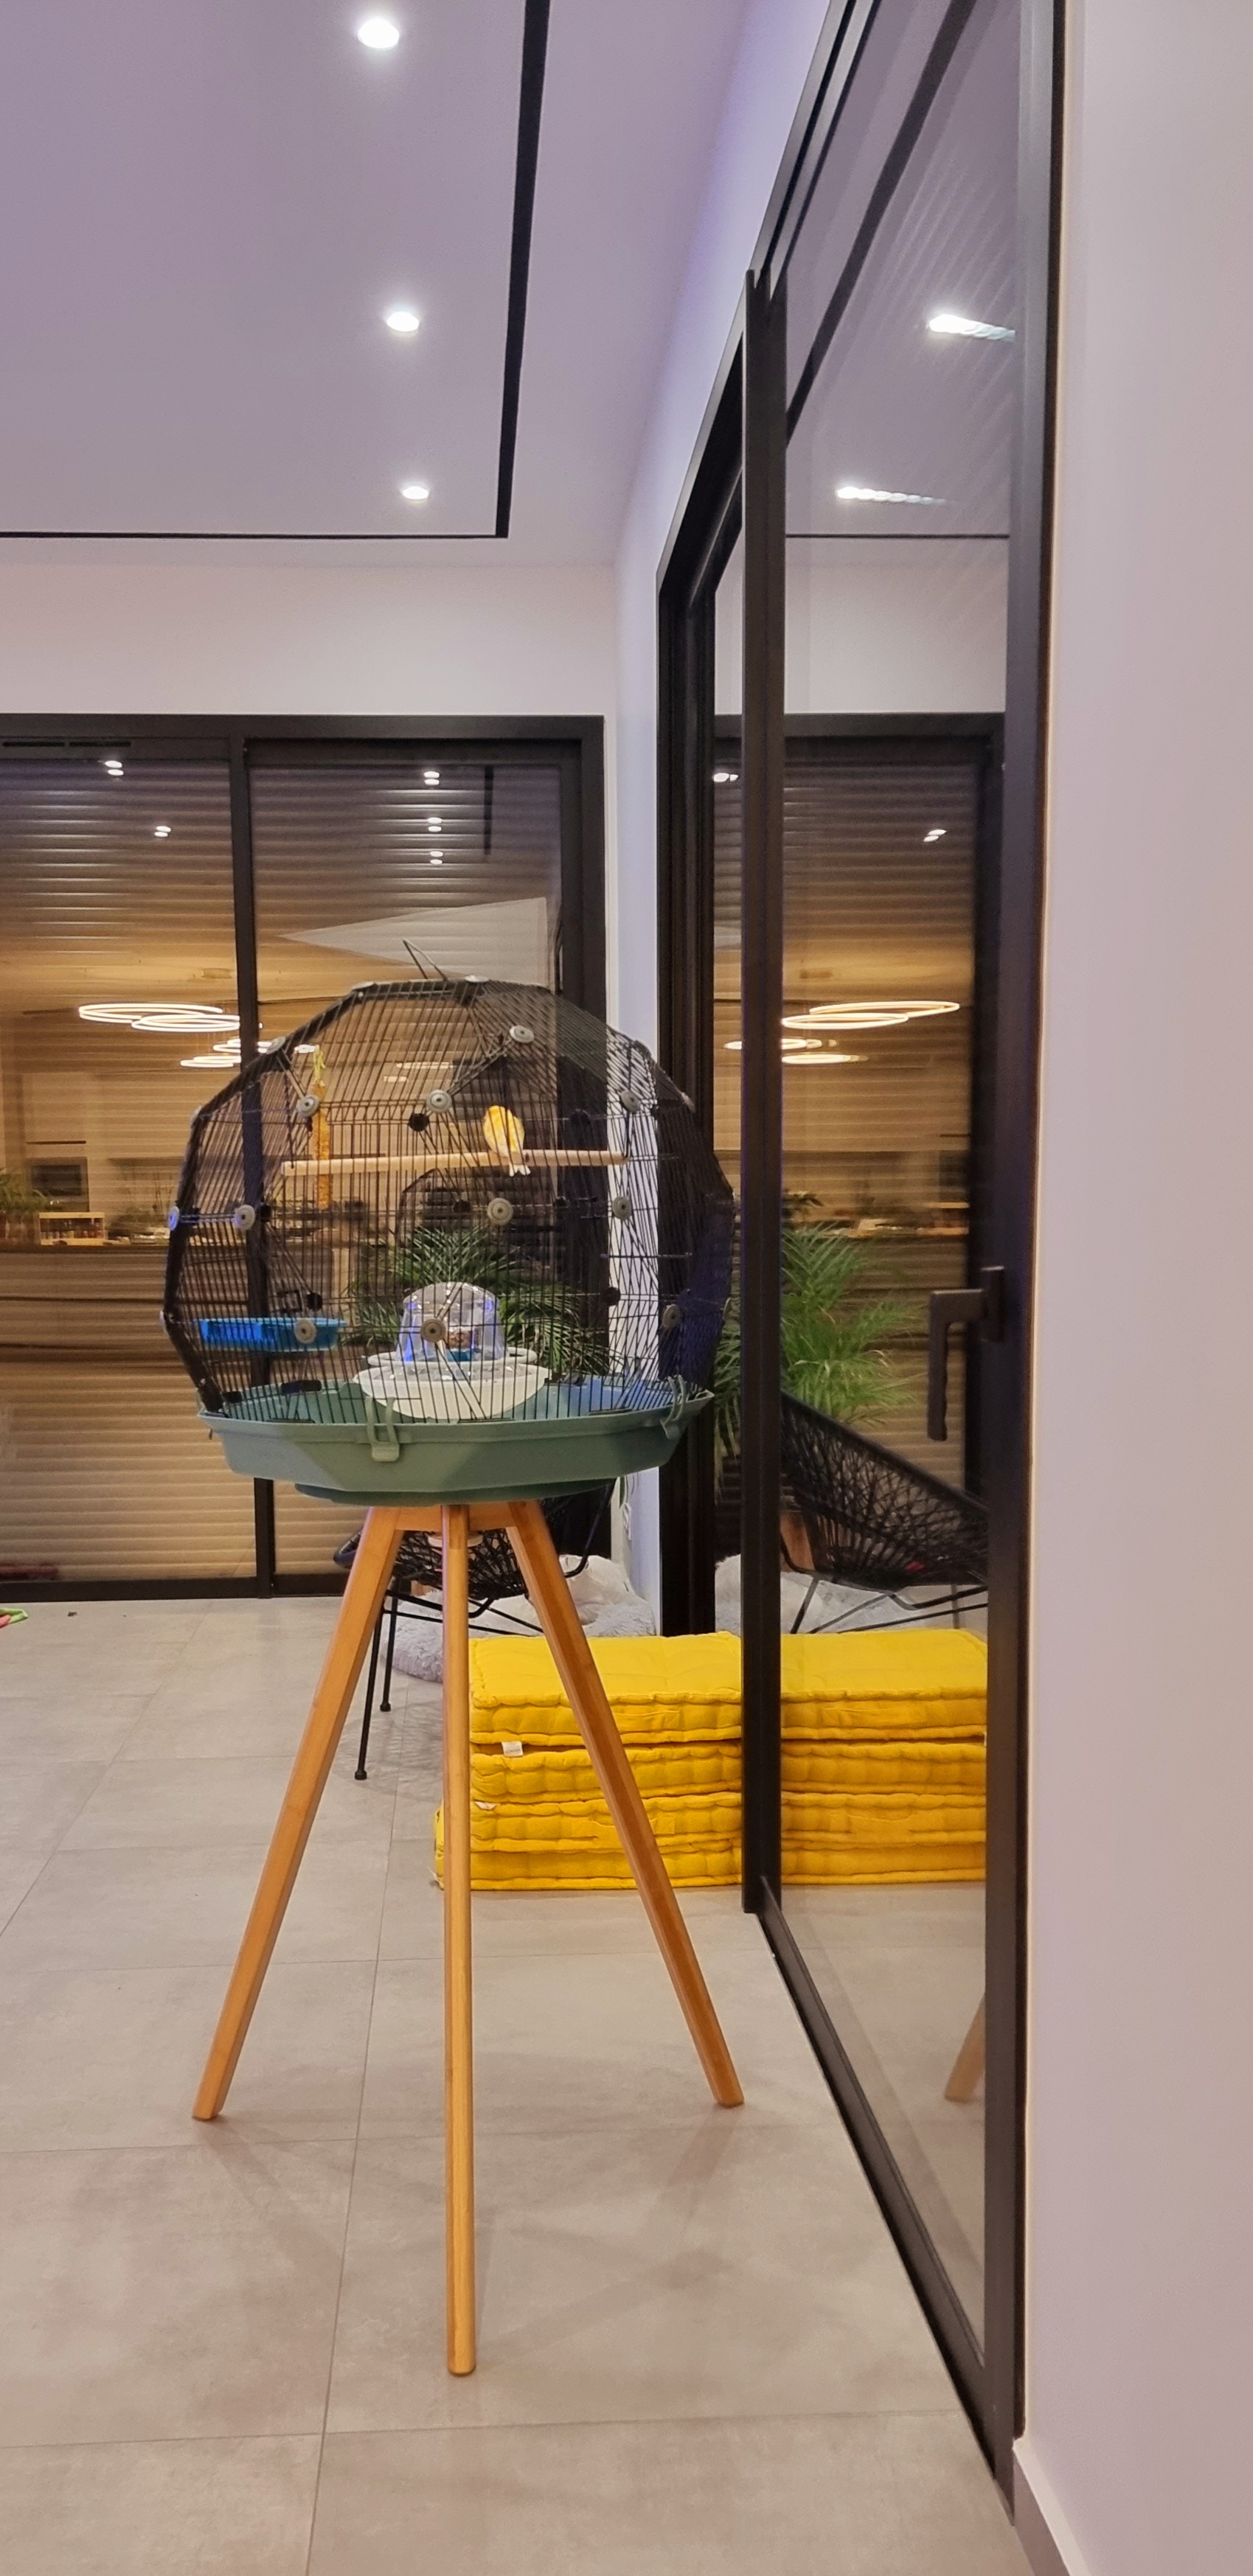 A blue and black geo cage with stand in a room